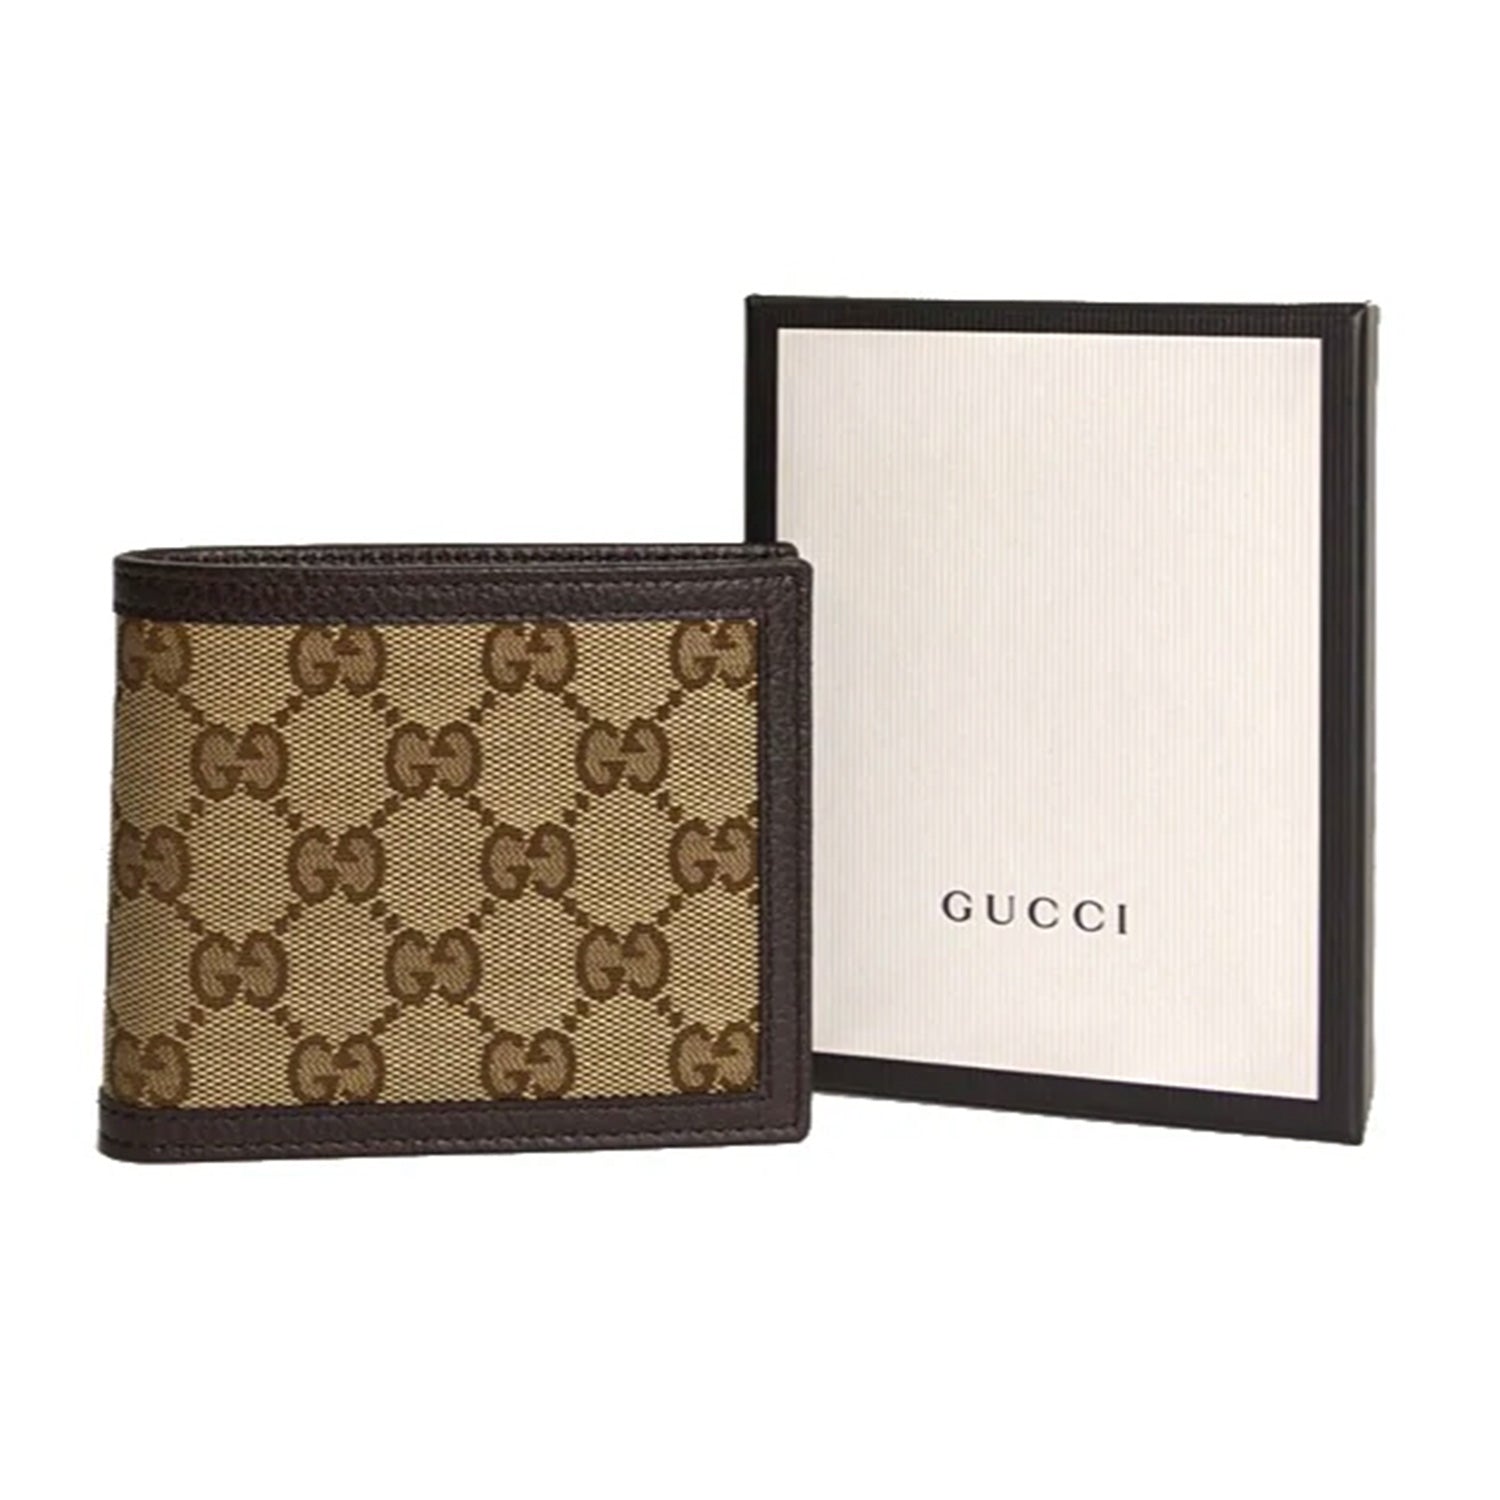 Gucci Lime Green Rubberized Guccissima Leather Bifold Wallet for Men